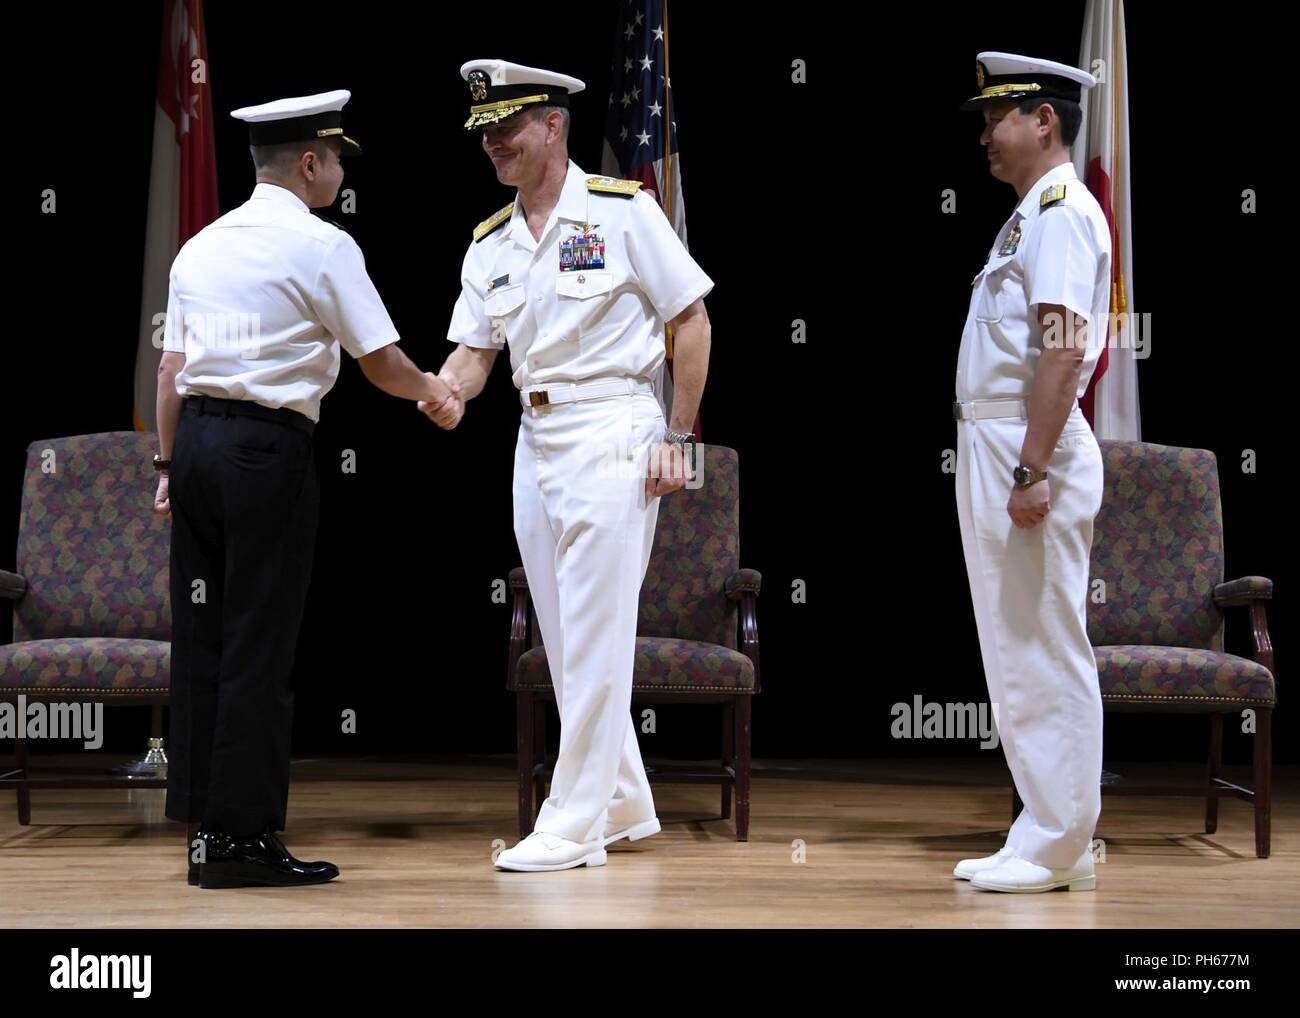 MANAMA, Bahrain (June 28, 2018) Vice Adm. Scott Stearney, middle, commander of U.S. Naval Forces Central Command, U.S. 5th Fleet and Combined Maritime Forces,  shakes the hand of Republic of Singapore Navy Rear Adm. Saw Shi Tat, oncoming commander of Combined Task Force (CTF) 151, left, during the task force's change of command ceremony on Naval Support Activity Bahrain. CTF 151's mission is to disrupt piracy at sea and to engage with regional and other partners to build capacity and improve relevant capabilities in order to protect global maritime commerce and secure freedom of navigation. Stock Photo